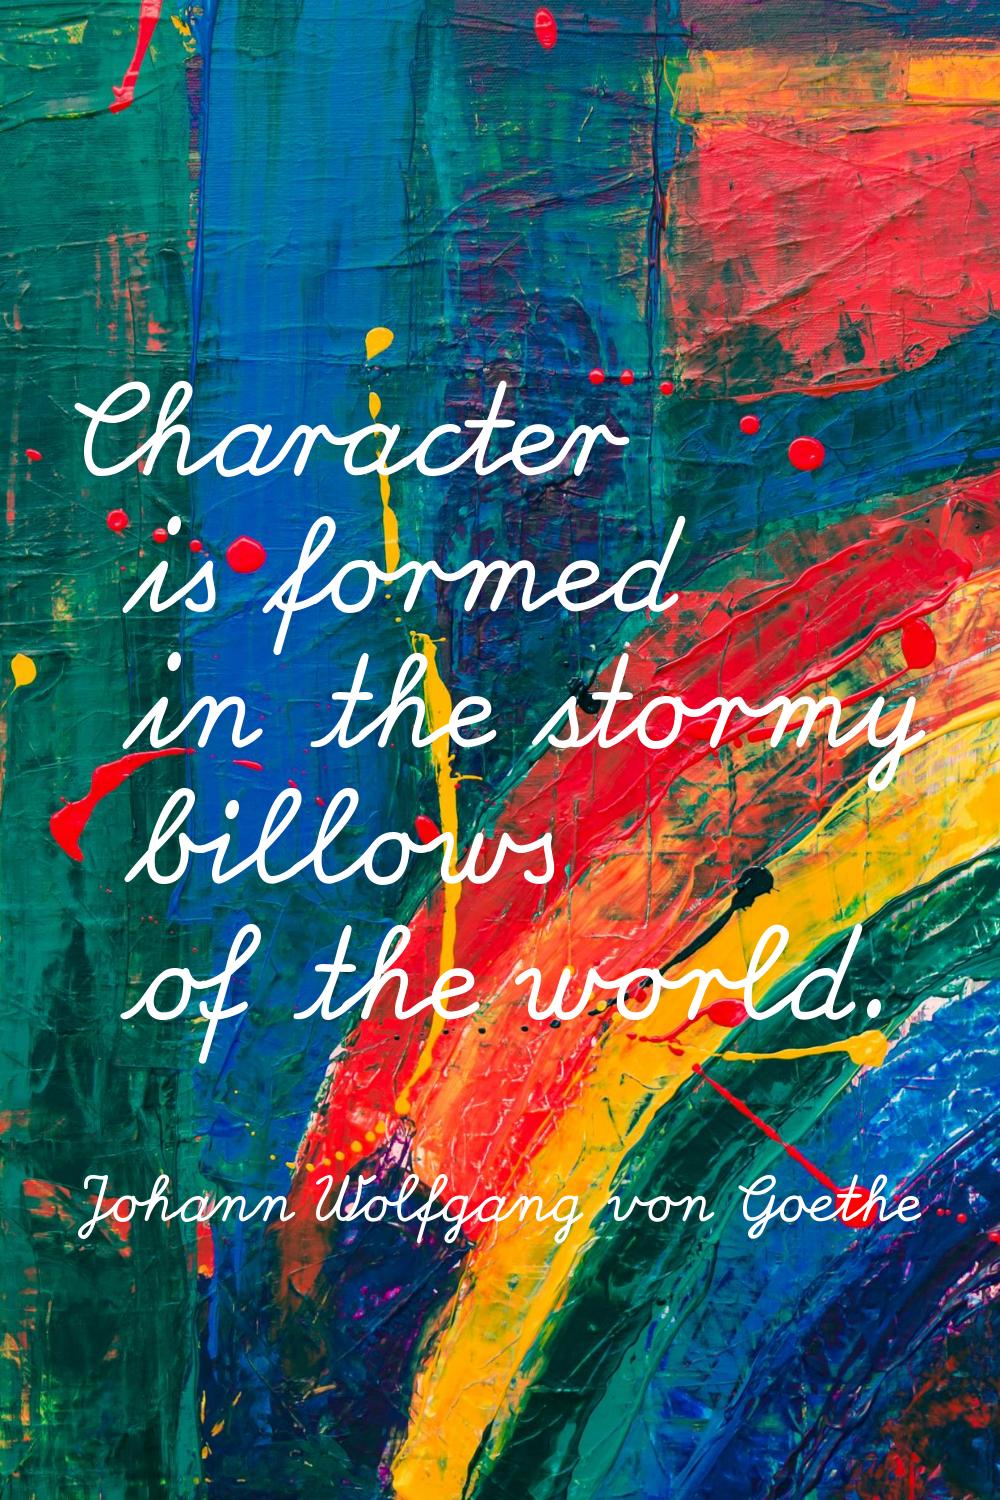 Character is formed in the stormy billows of the world.